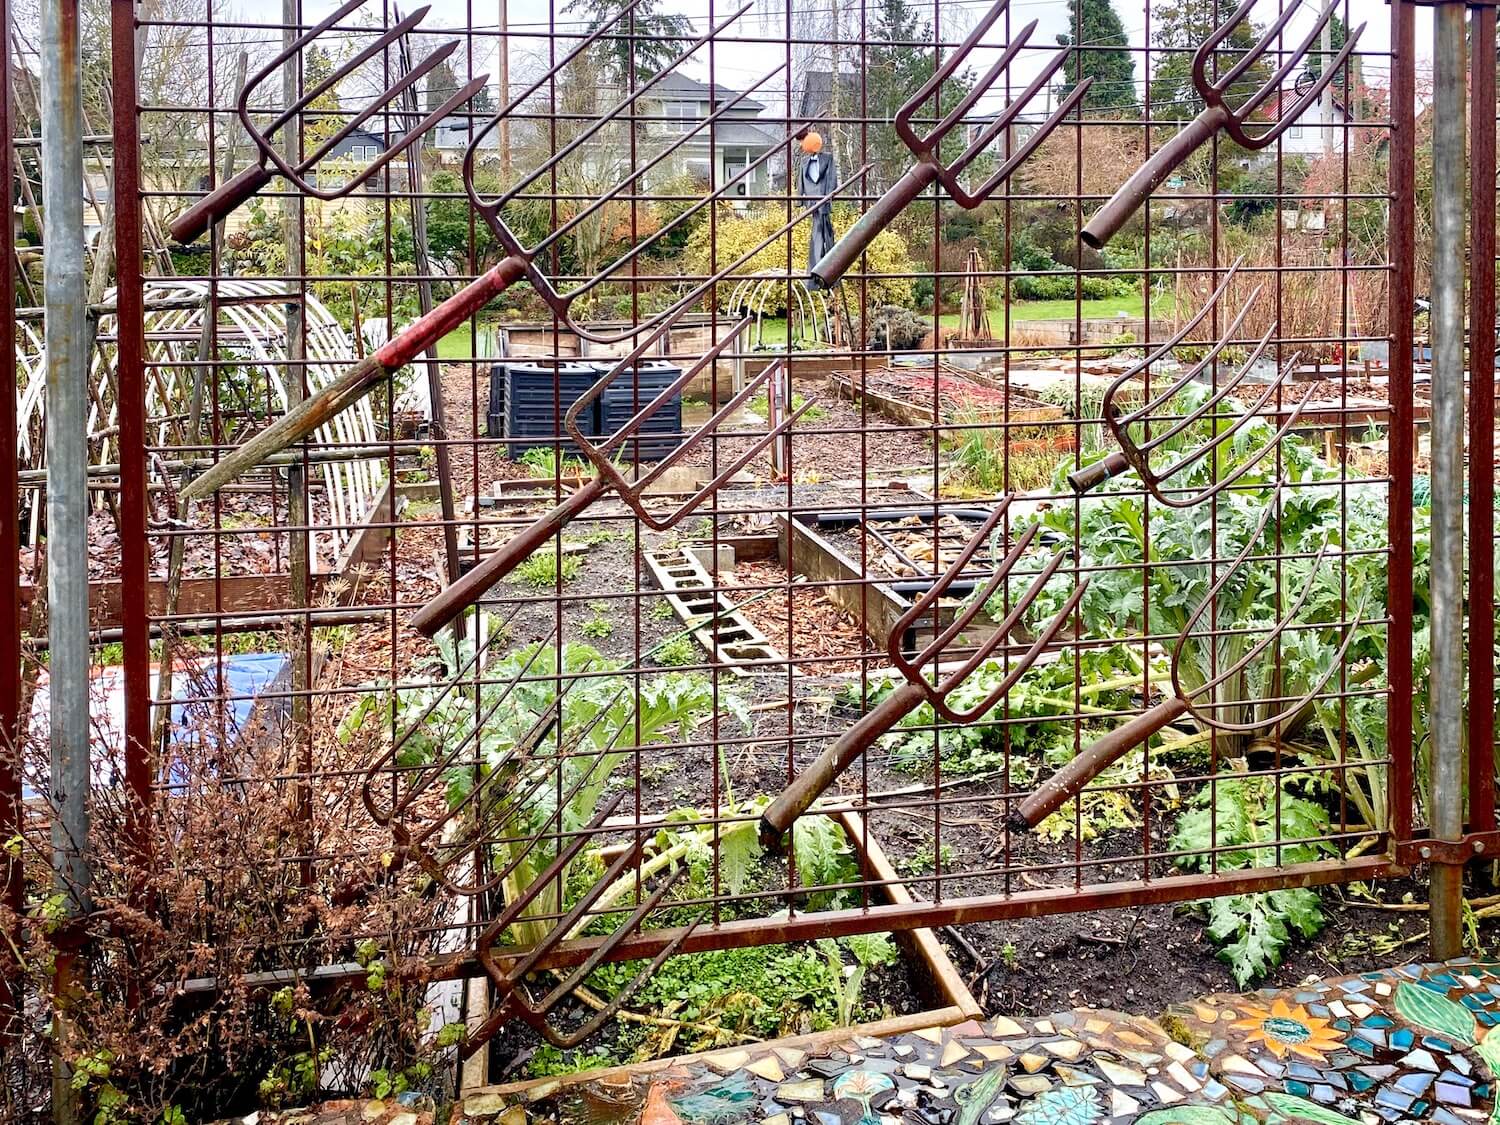 A metal grade garden gate allows vision through the fence, made up of a collection of pitchforks, towards the Seattle gardens in this wintry scene.